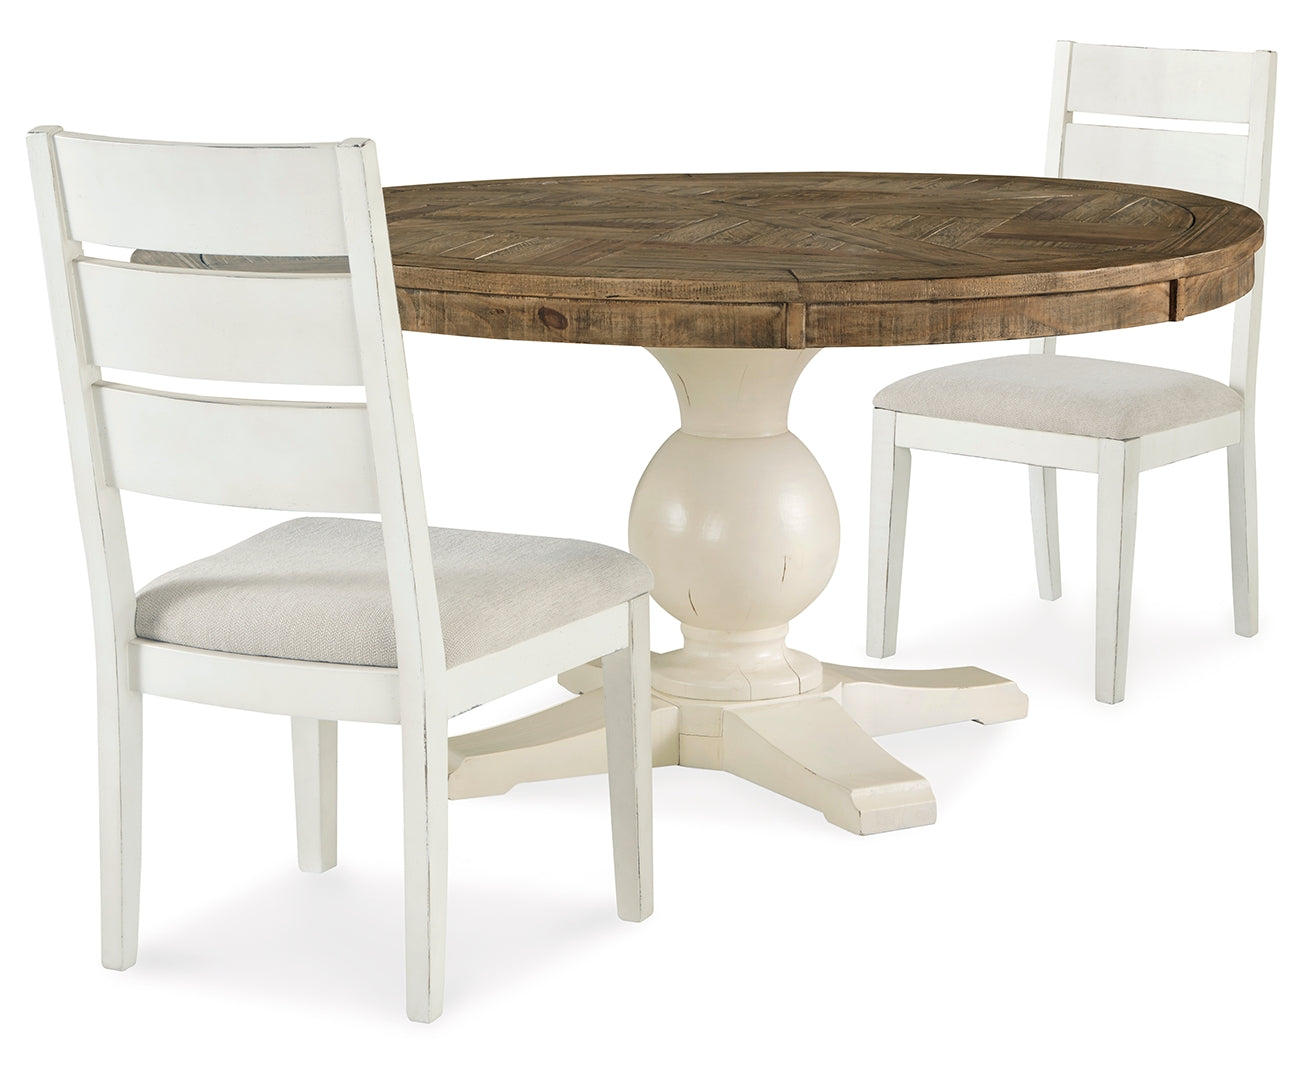 Grindleburg Dining Table and 2 Chairs